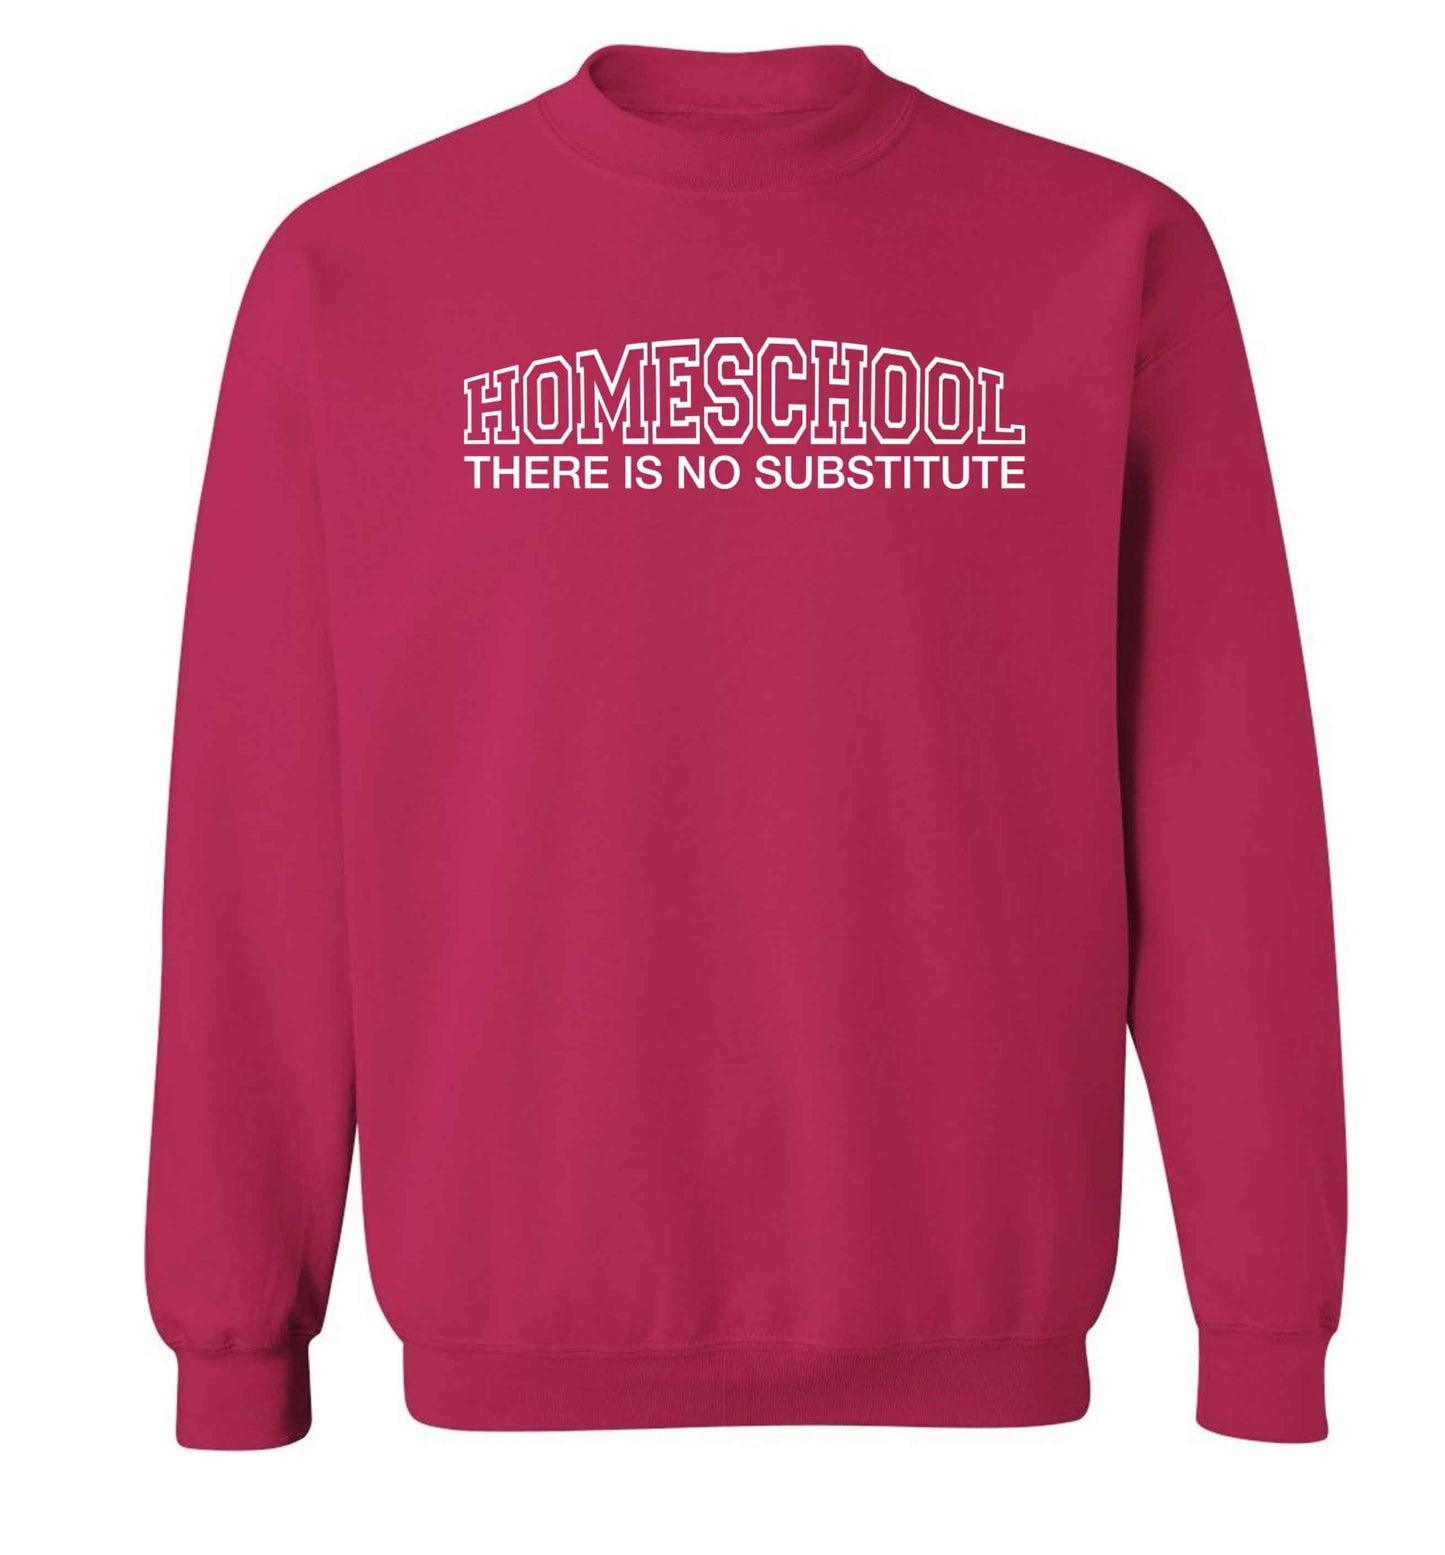 Homeschool there is not substitute Adult's unisex pink Sweater 2XL